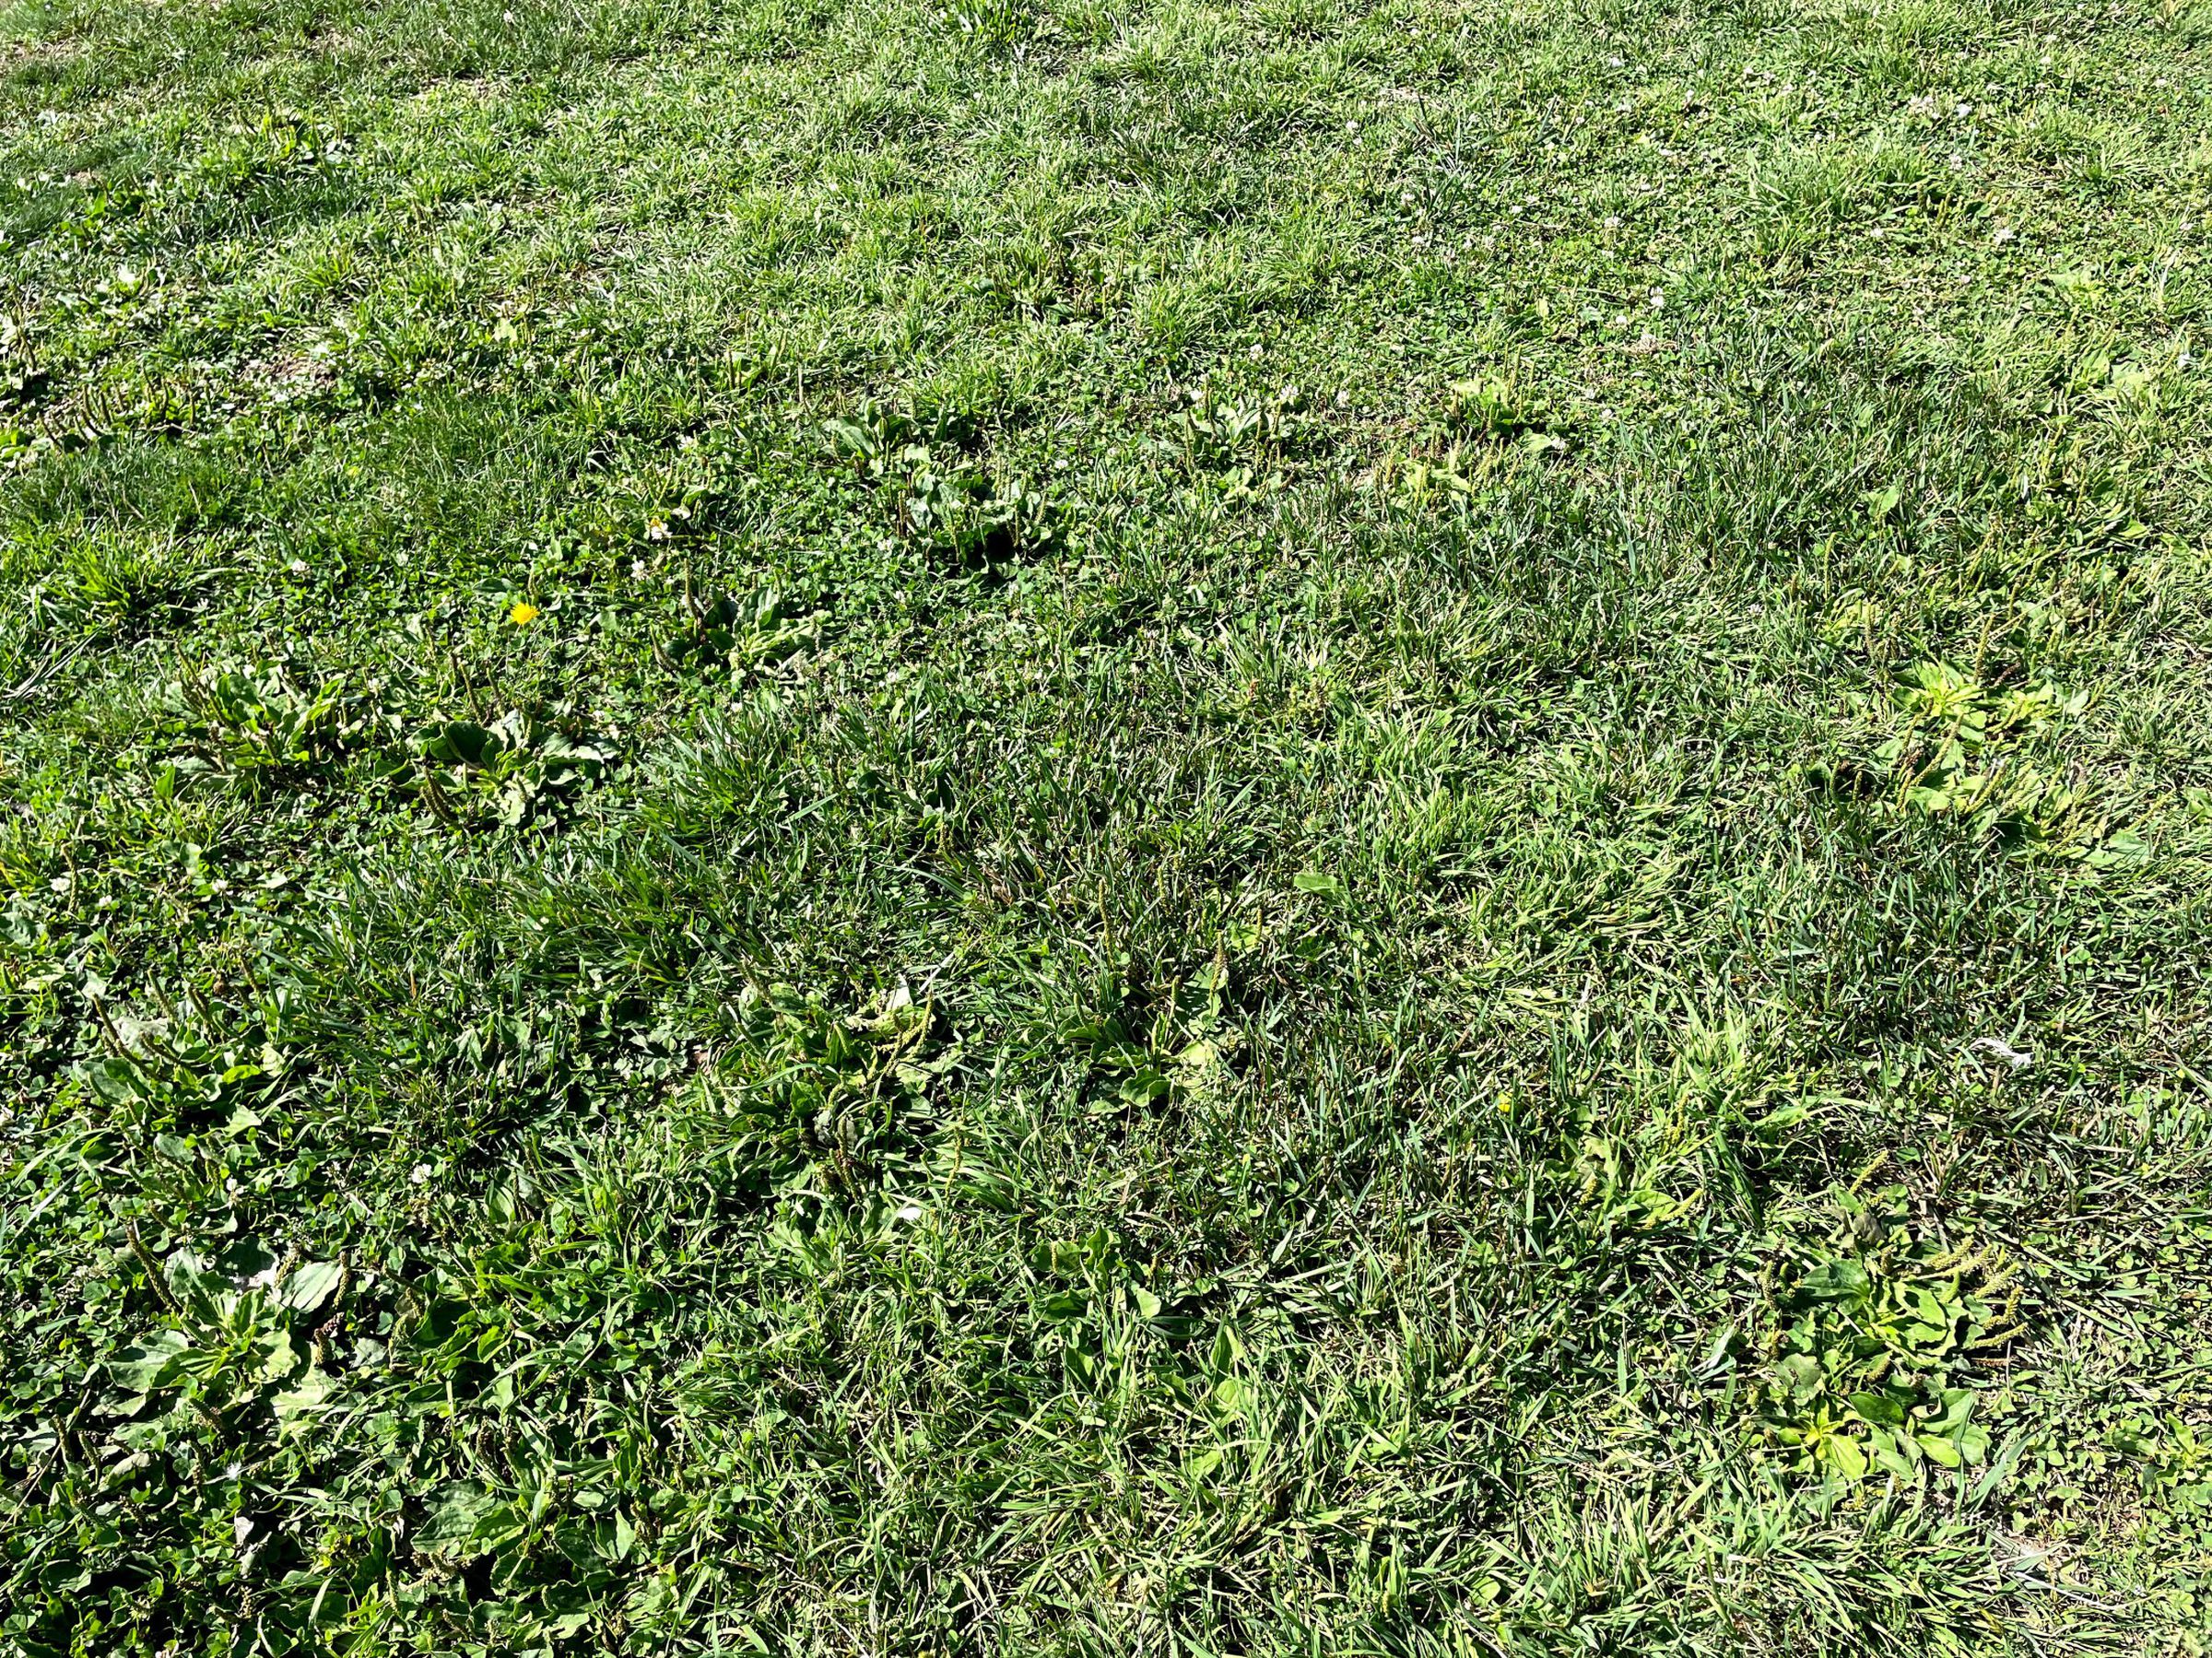 ...but clumpy turf can. There are three balls hidden in this picture.